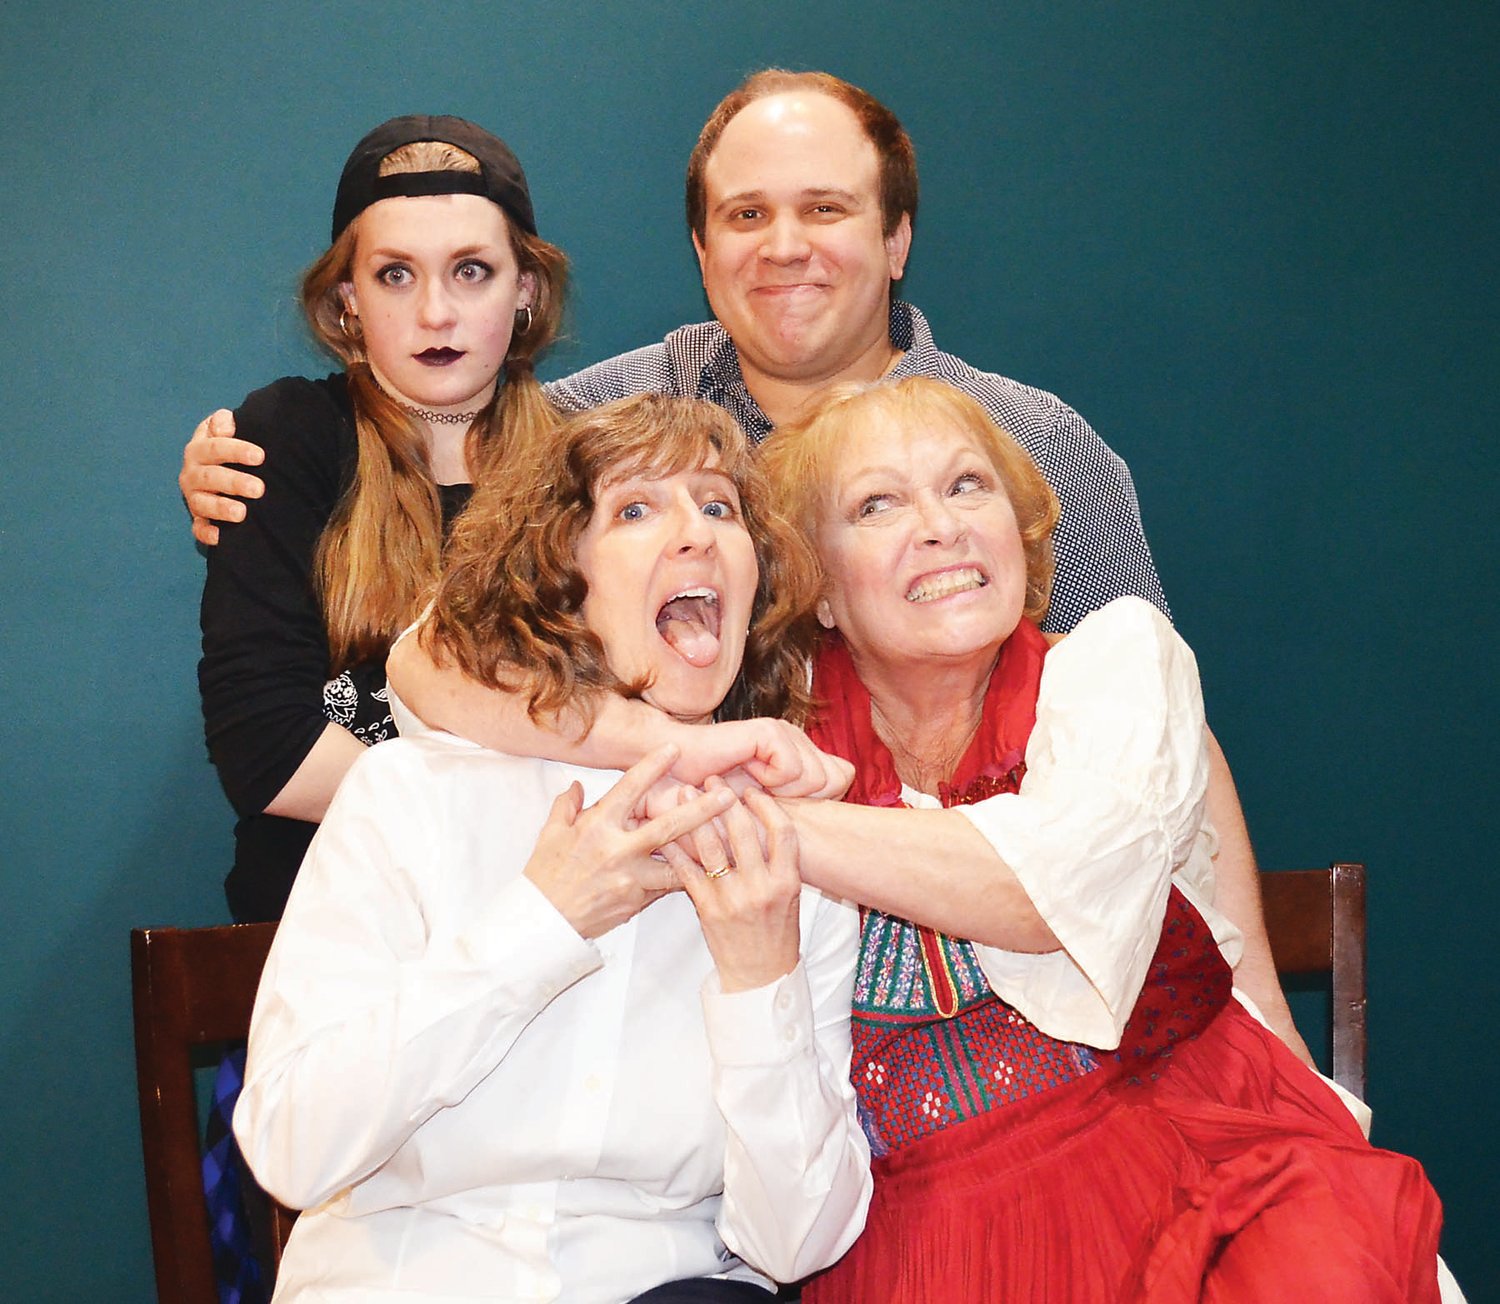 Back row, from left, are Elizabeth Aber and Thomas Rush; and front row, from left, are Heike-Lara Nyce and Jan Thompson, starring in “The Kitchen Witches.”